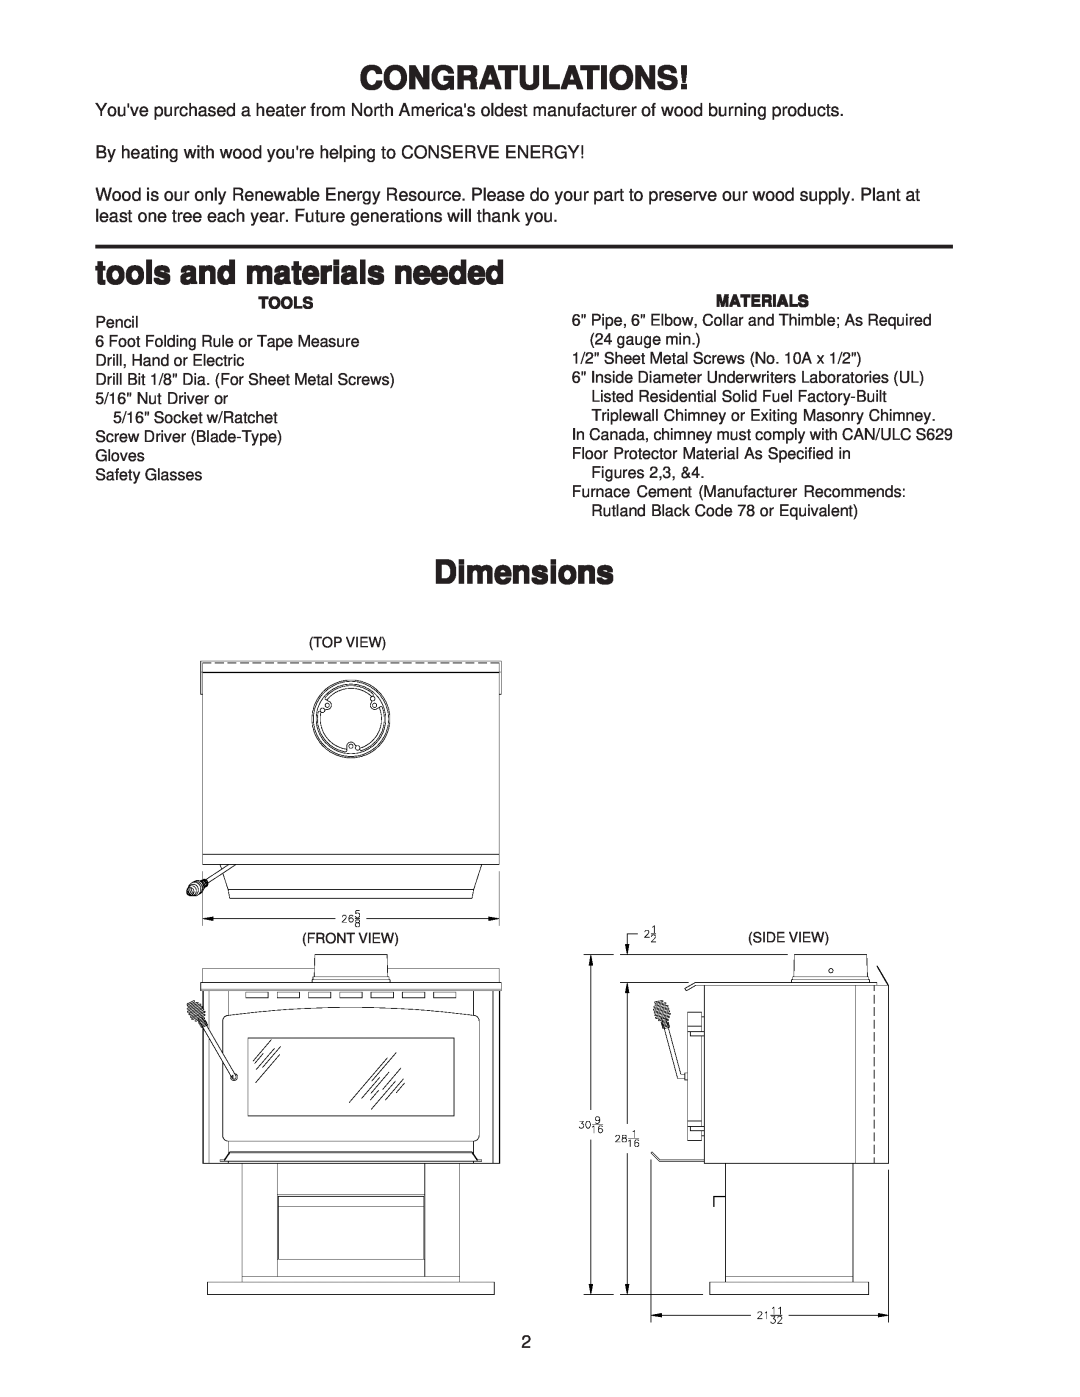 United States Stove 2007 owner manual Congratulations, tools and materials needed, Dimensions 